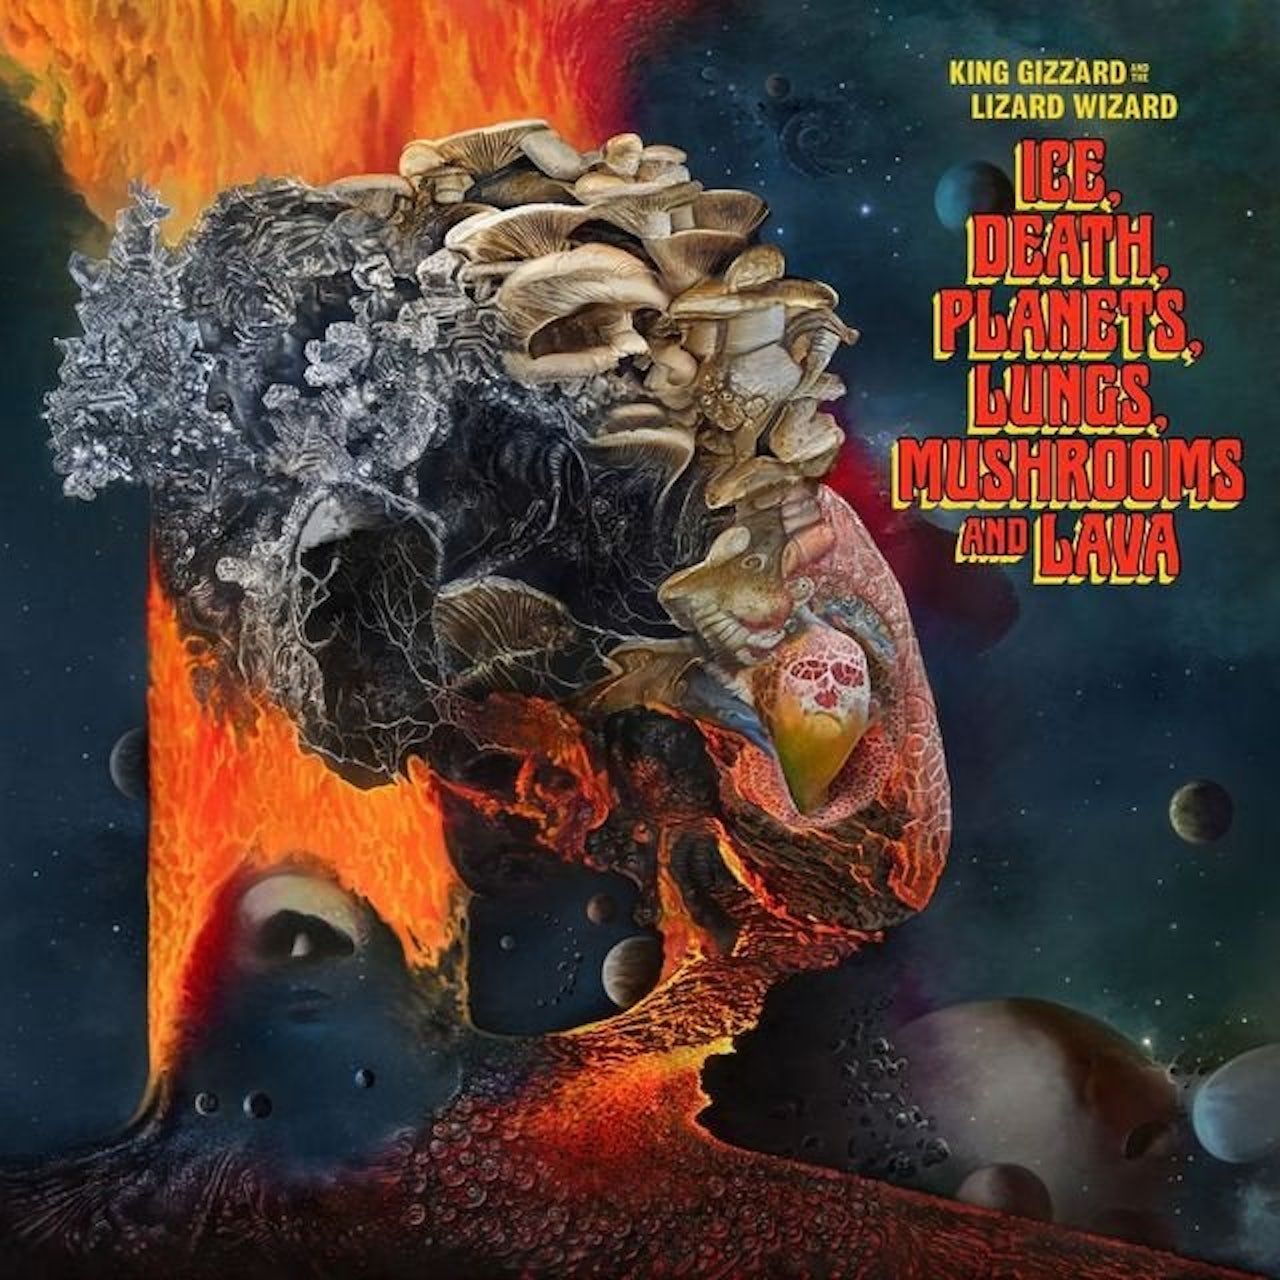 0842812170164, Виниловая пластинка King Gizzard & The Lizard Wizard, Ice, Death, Planets, Lungs, Mushroom And Lava childlife clinicals lung health healthy lung